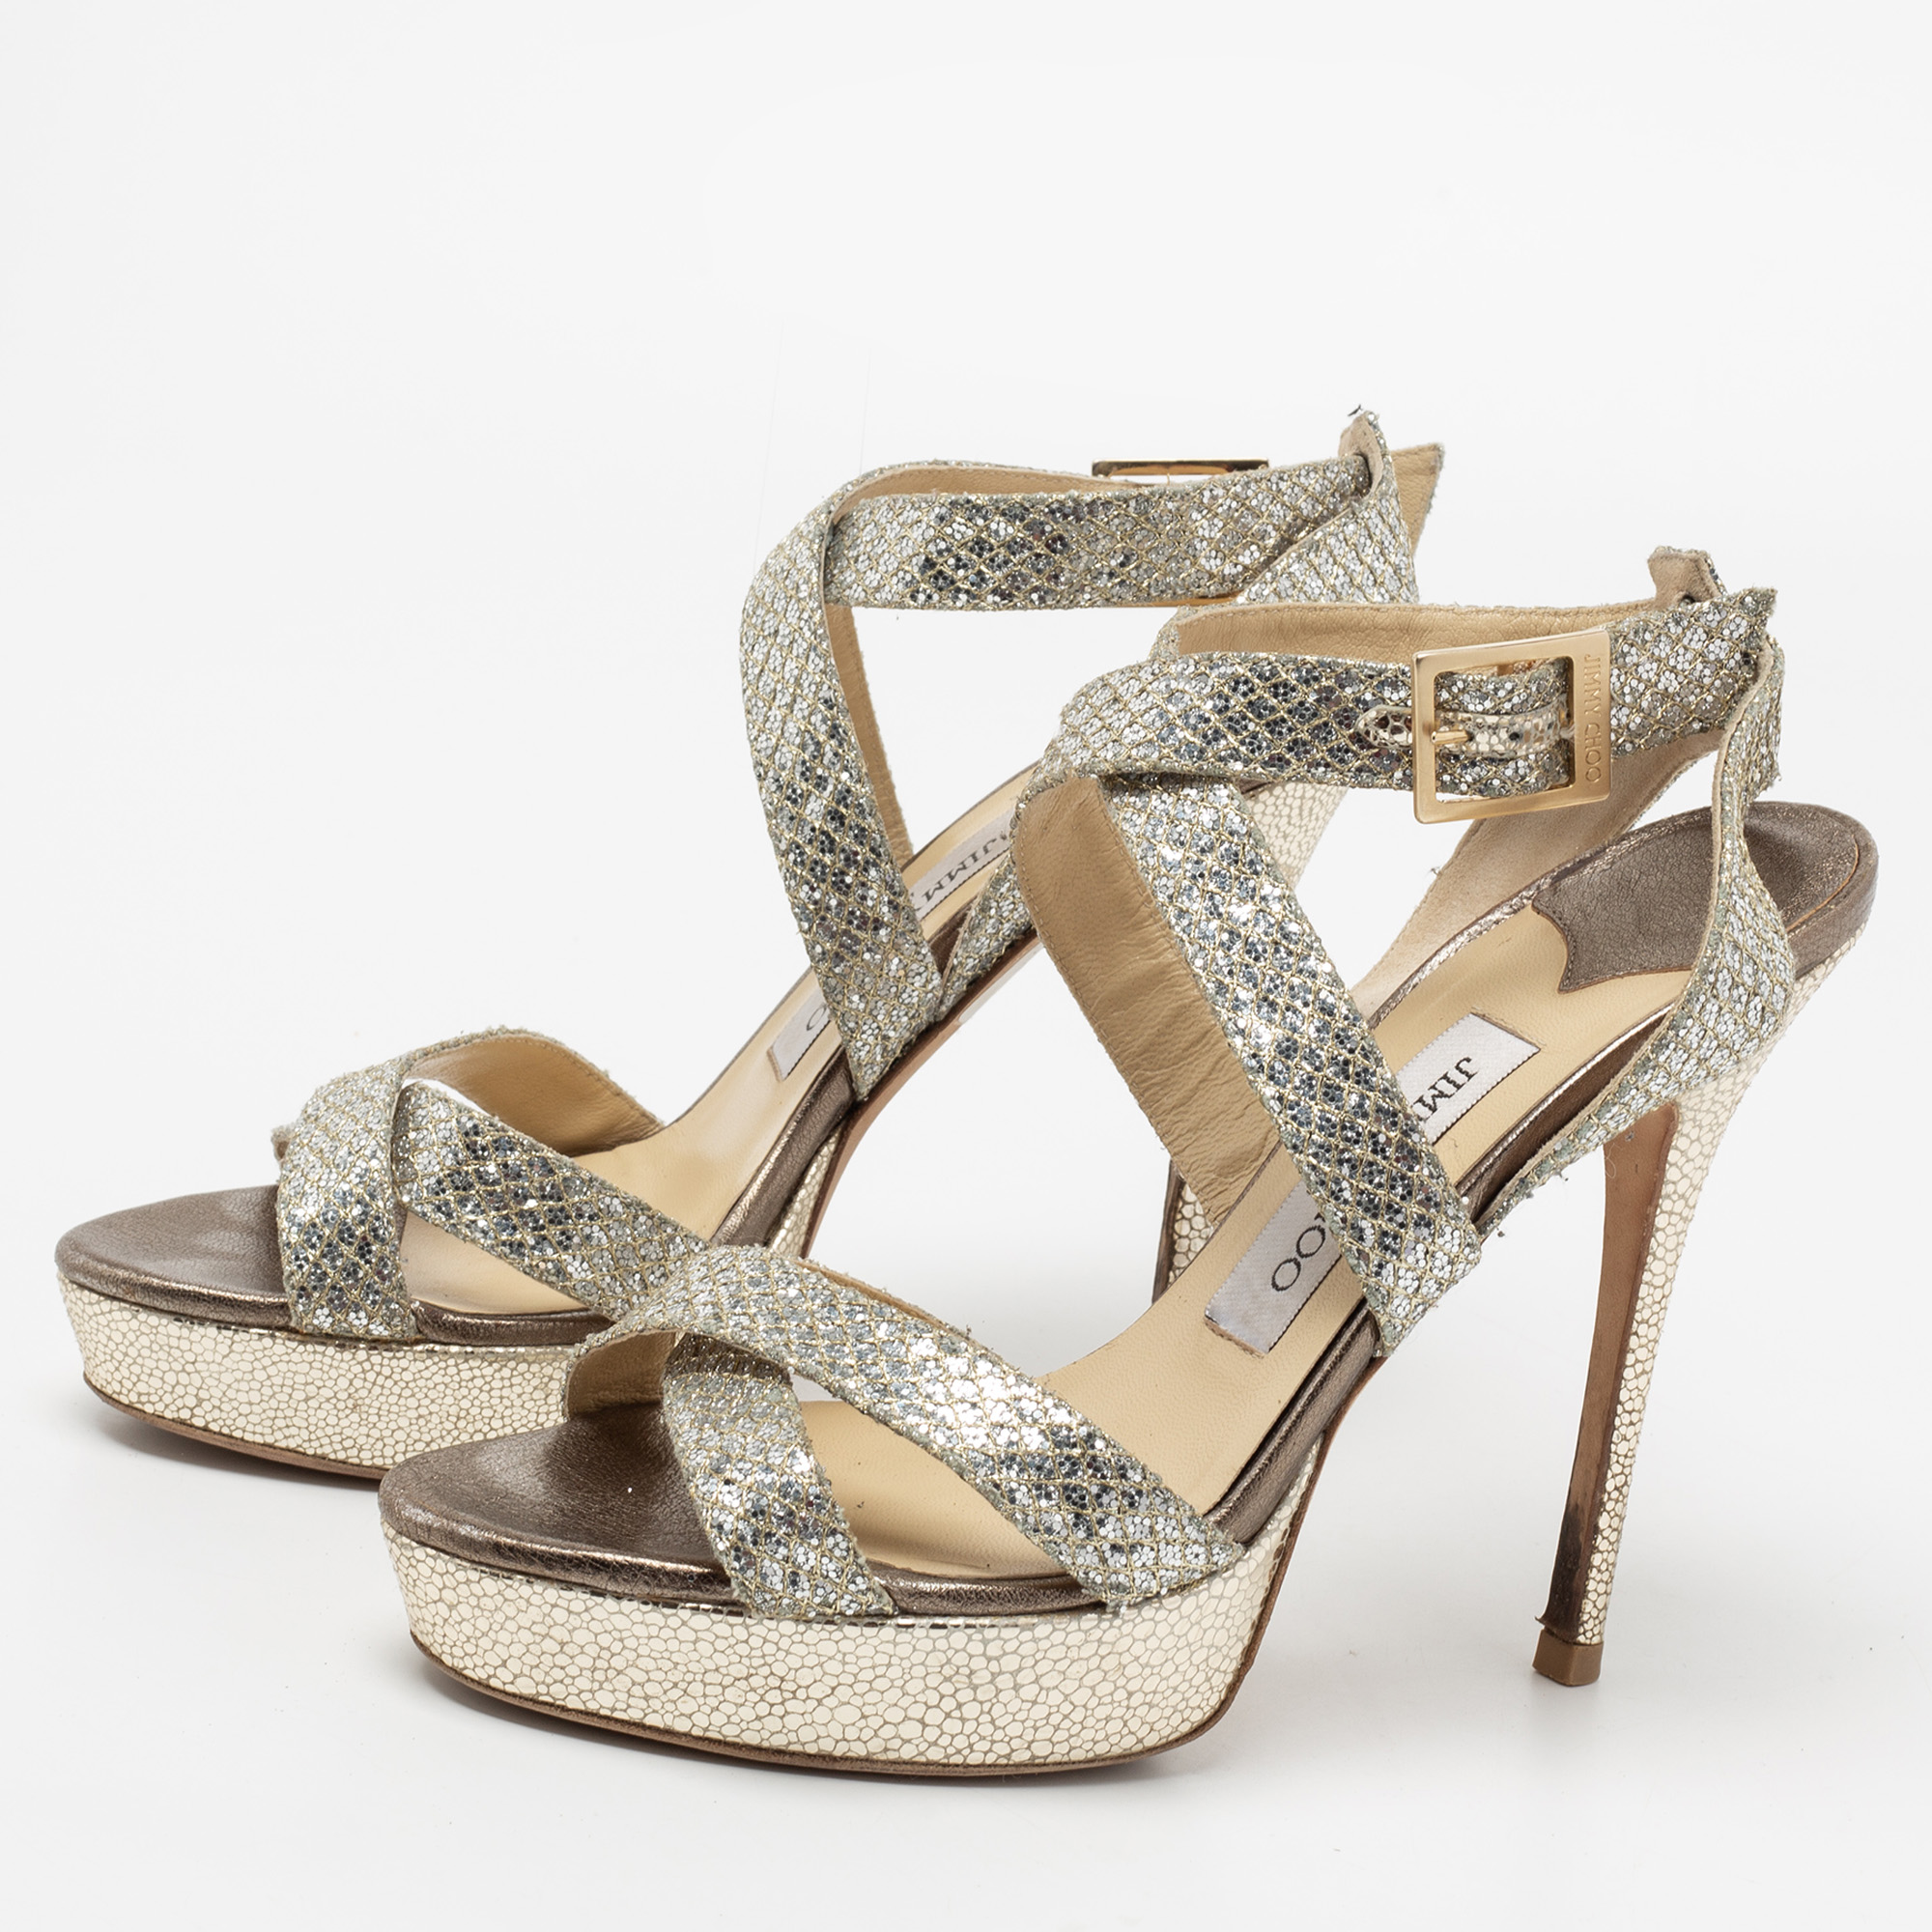 

Jimmy Choo Metallic Silver/Gold Glitter And Lame Fabric Vamp Platform Ankle Strap Sandals Size